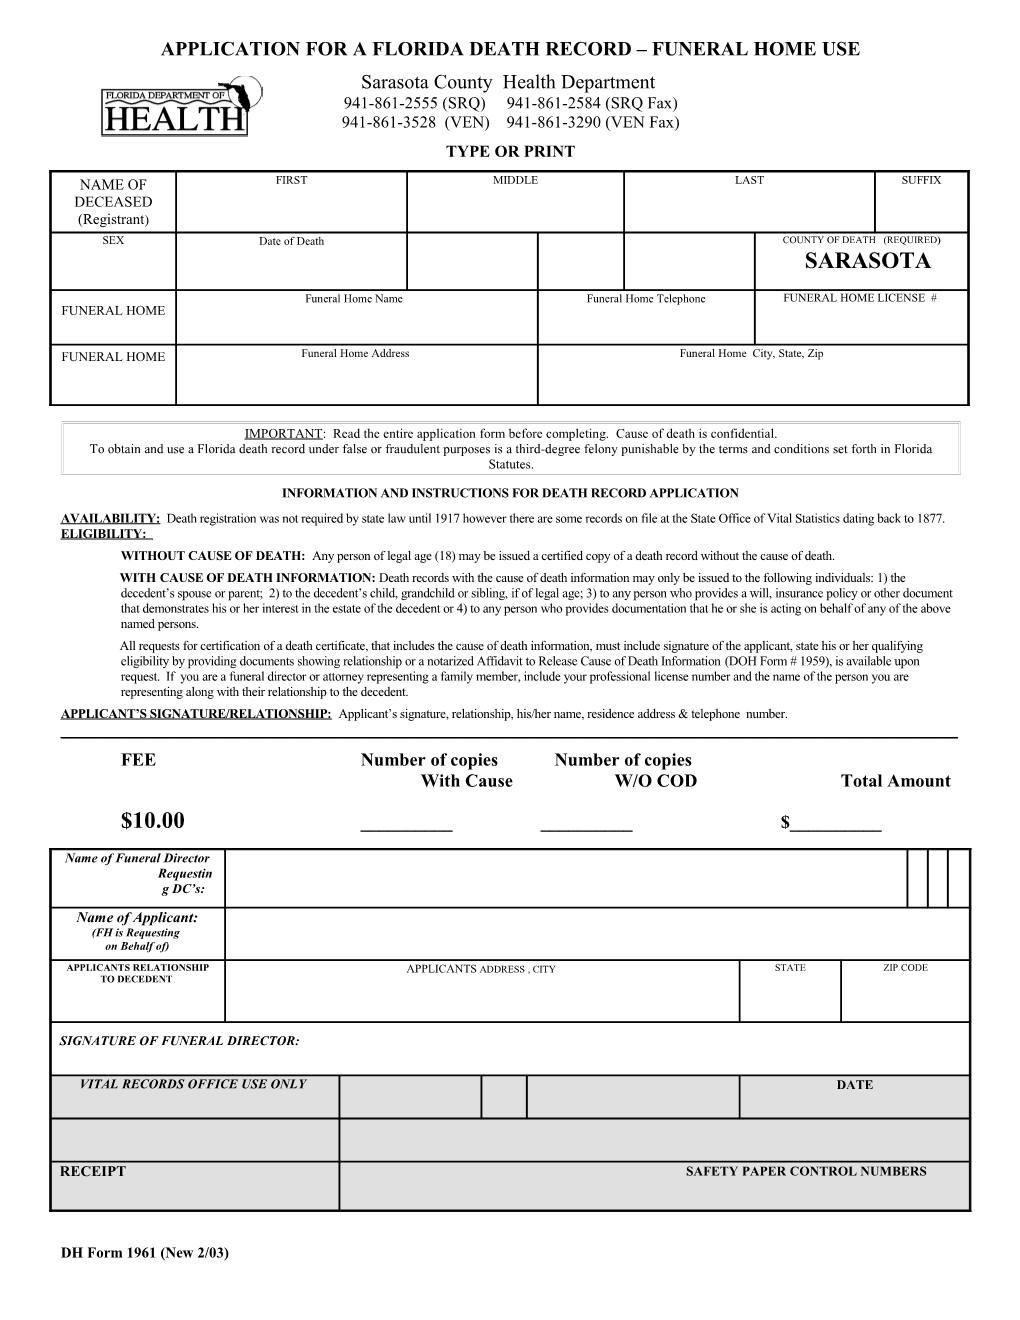 Application for a Florida Death Record Funeral Home Use